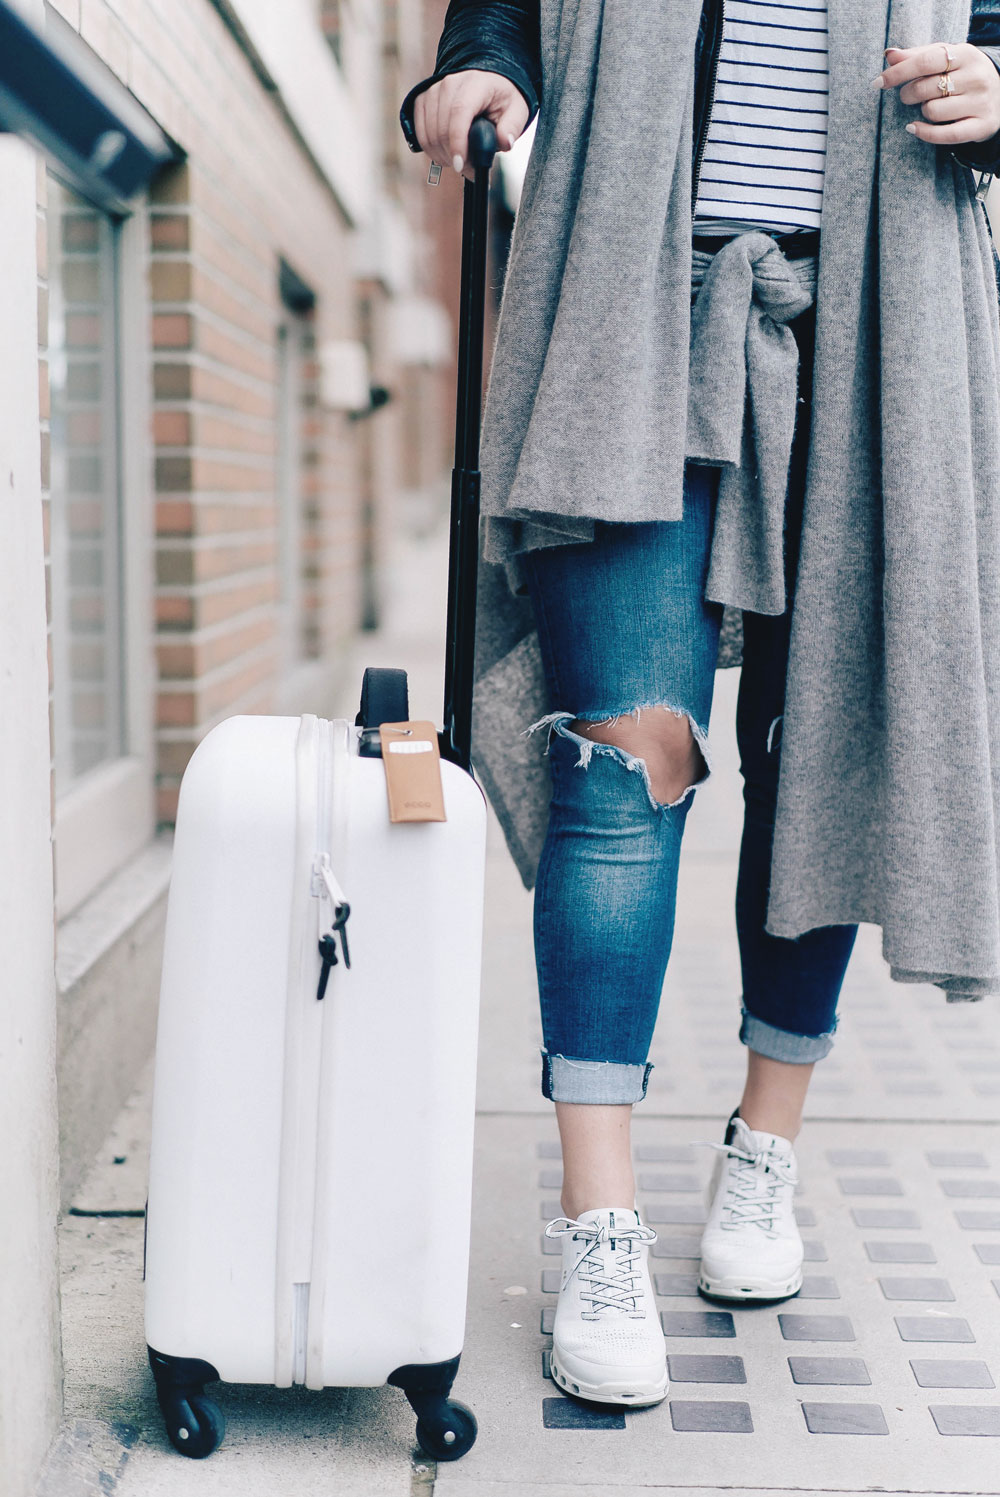 Outfits to wear while travelling on a plane in Ecco shoes, Leah Alexandra jewelry, best travel accessories, flight outfit ideas, airport style, what to wear on a plae, sneakers for flights, stylish luggage tags by To Vogue or Bust